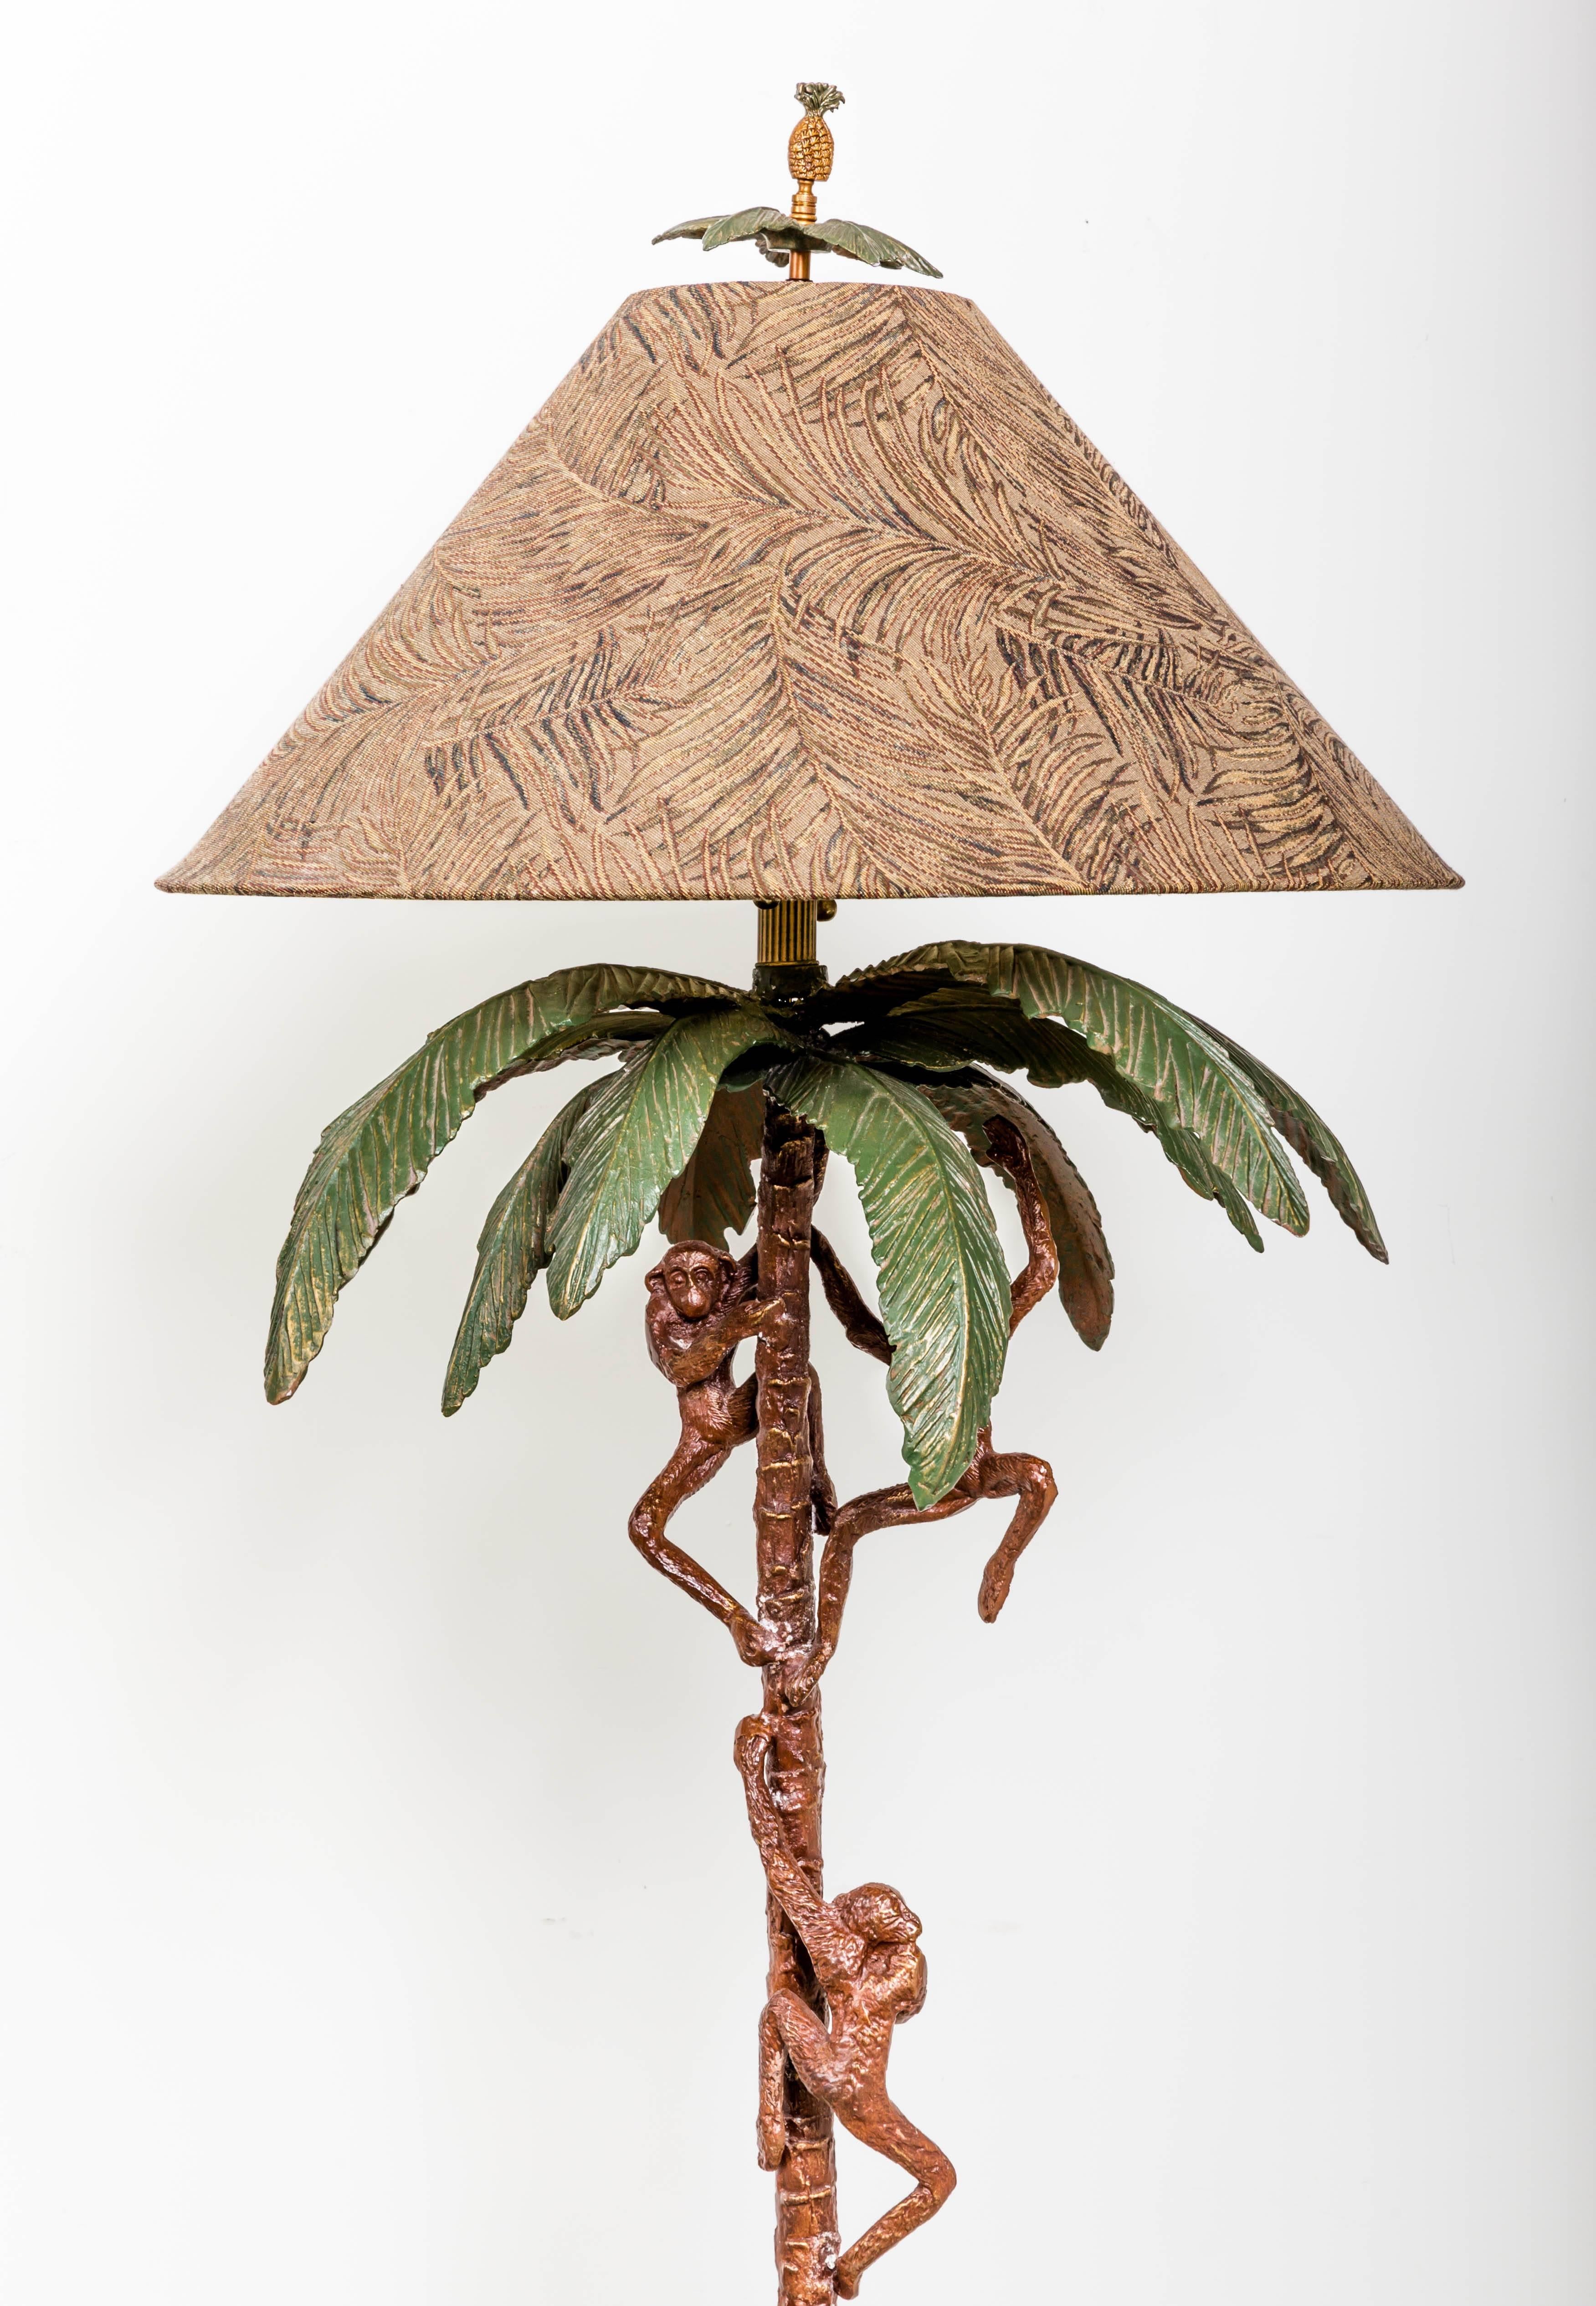 Cast metal floor lamp with monkey's and palm tree. Original fabric lamp shade, pineapple finial. Beach palm chic.